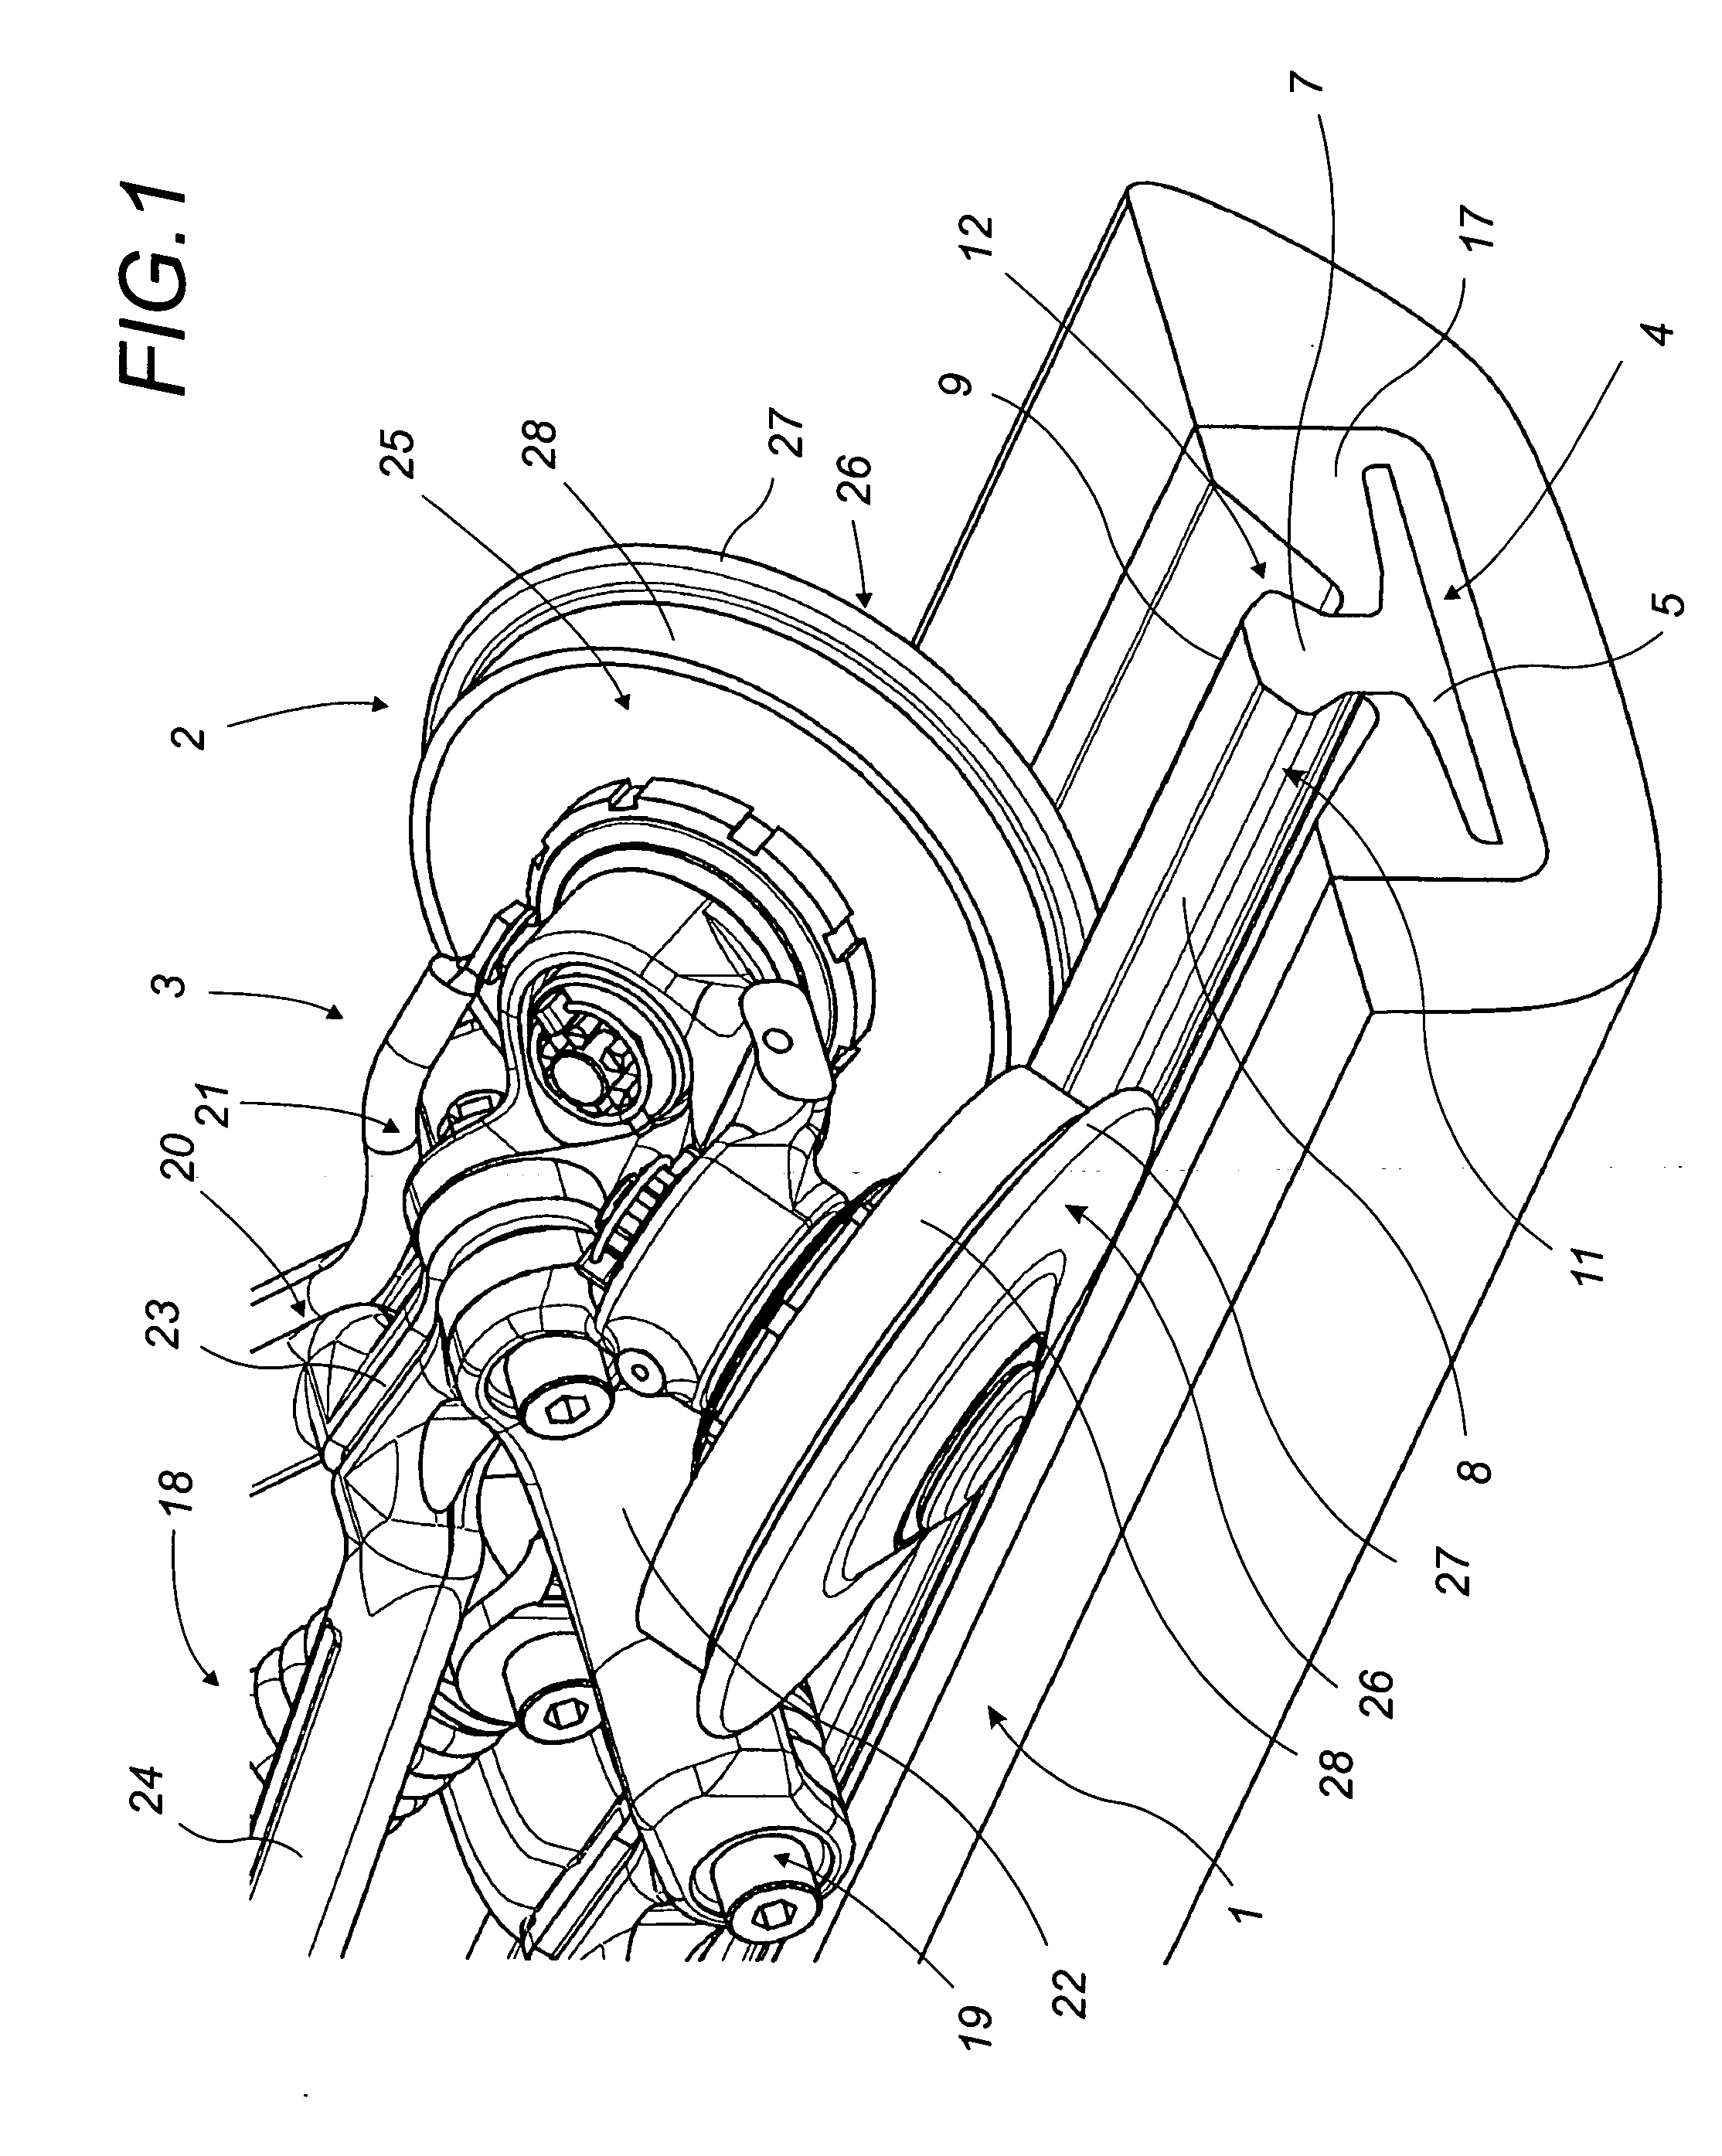 Guide assembly for guide rail comprising pair of angled guide wheels